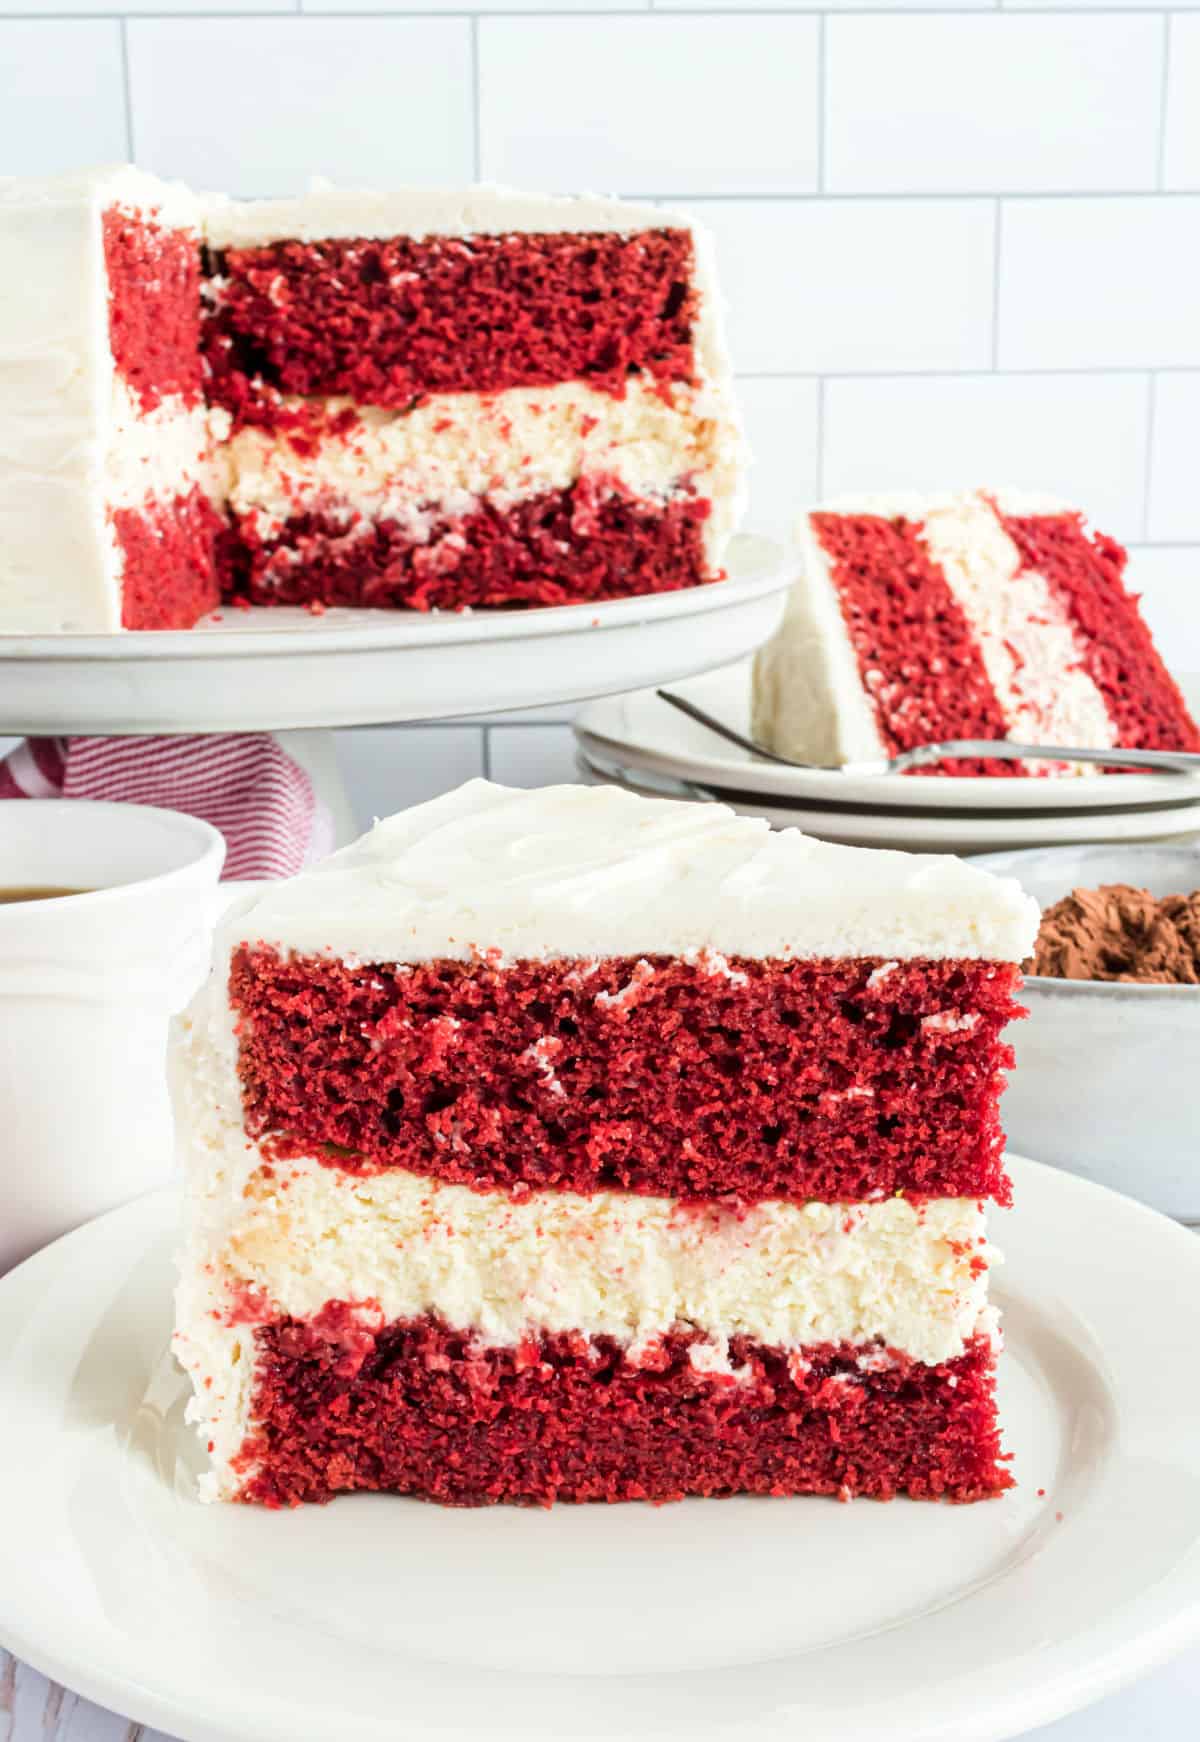 Slice of red velvet cake with cheesecake filling on a white plate.